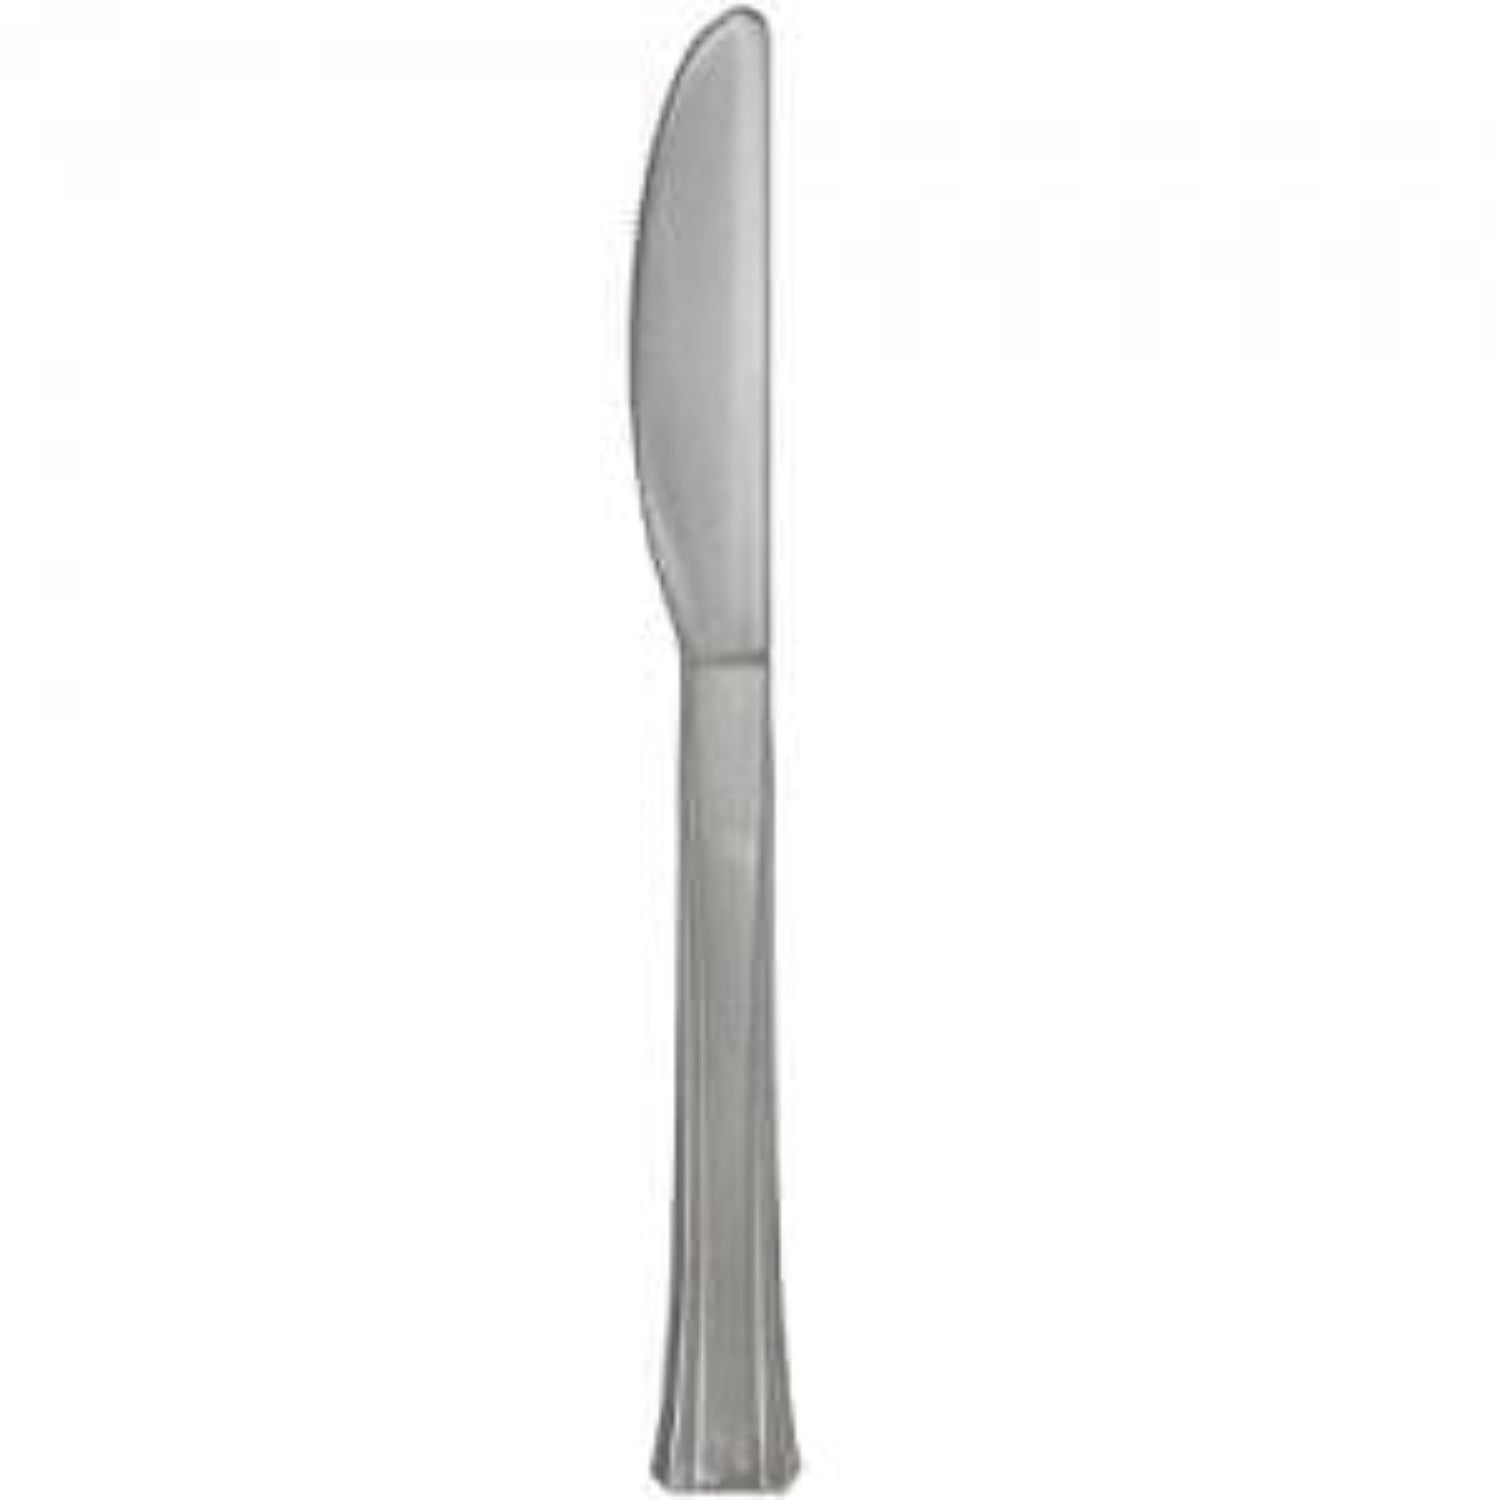 Lillian Tablesettings Extra Strong Quality Premium Plastic Silver Knives Cutlery Lillian   